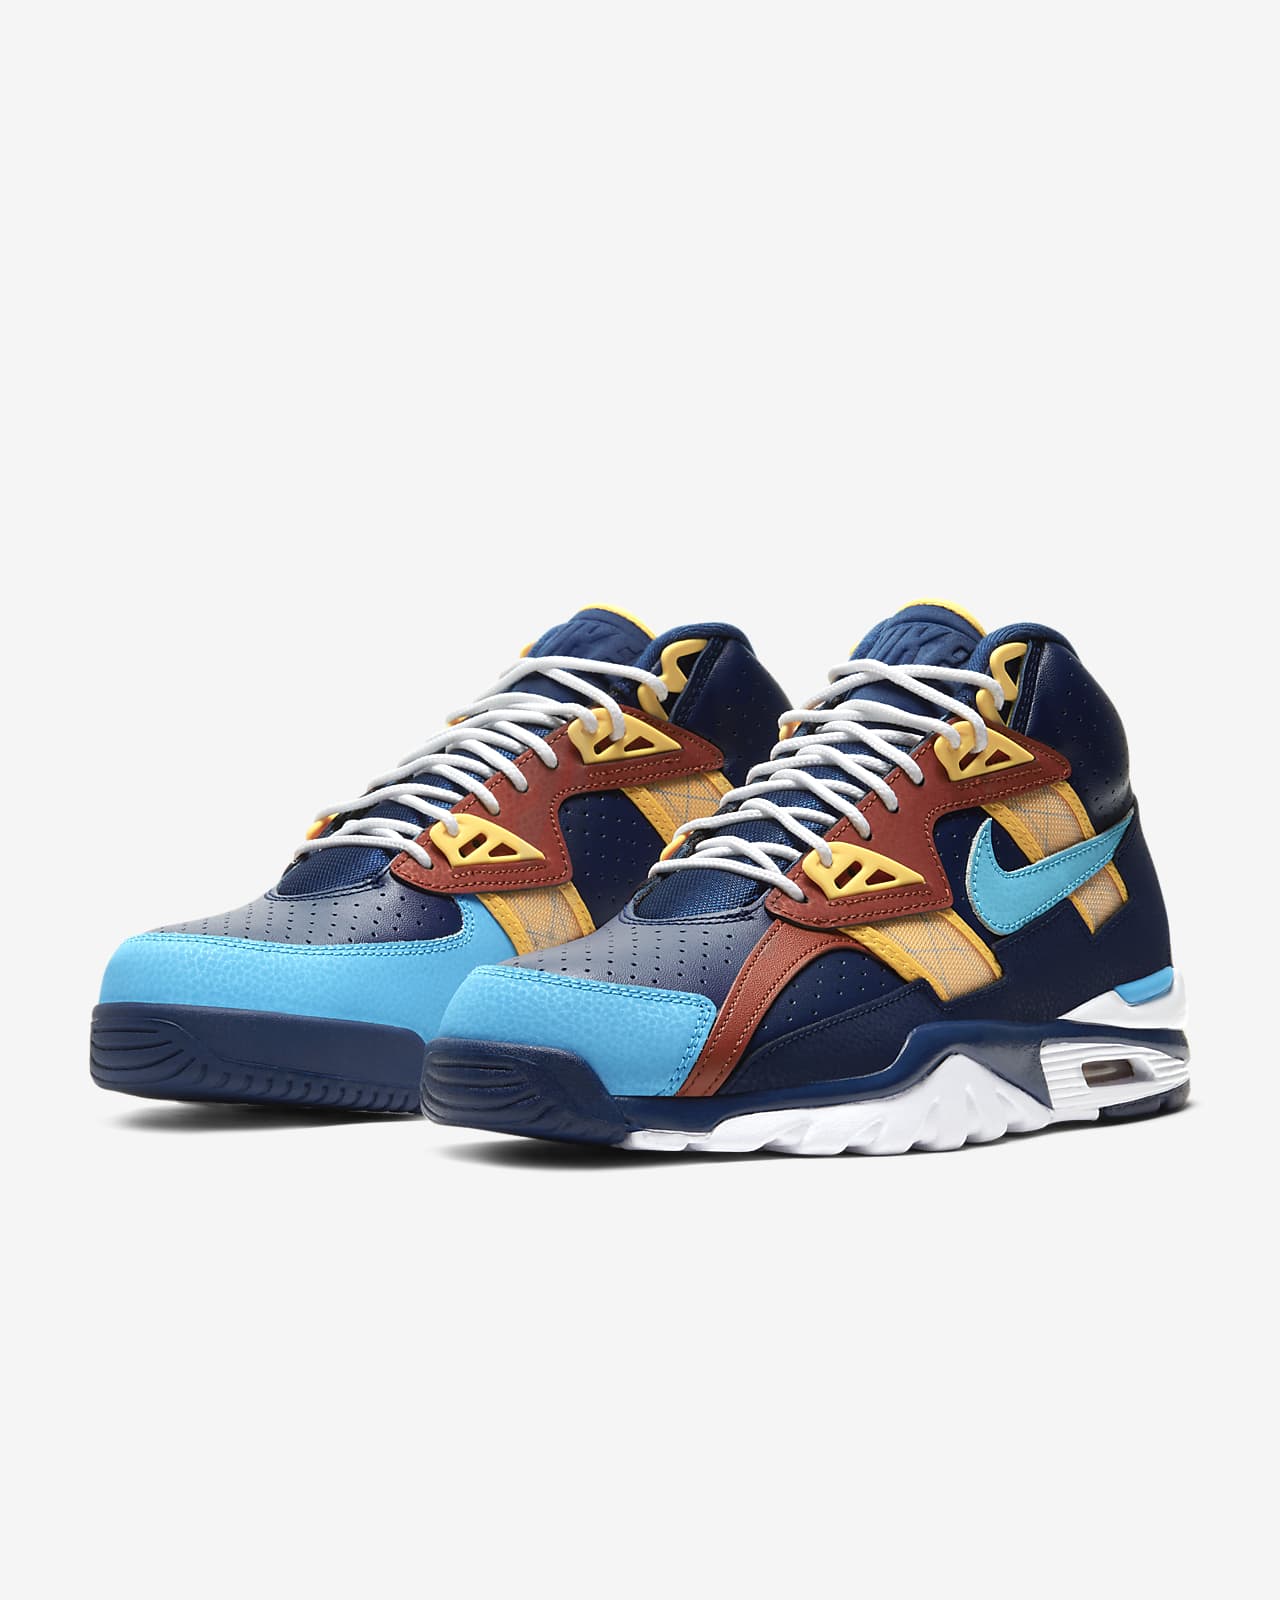 nike mens air trainer sc high shoes stores